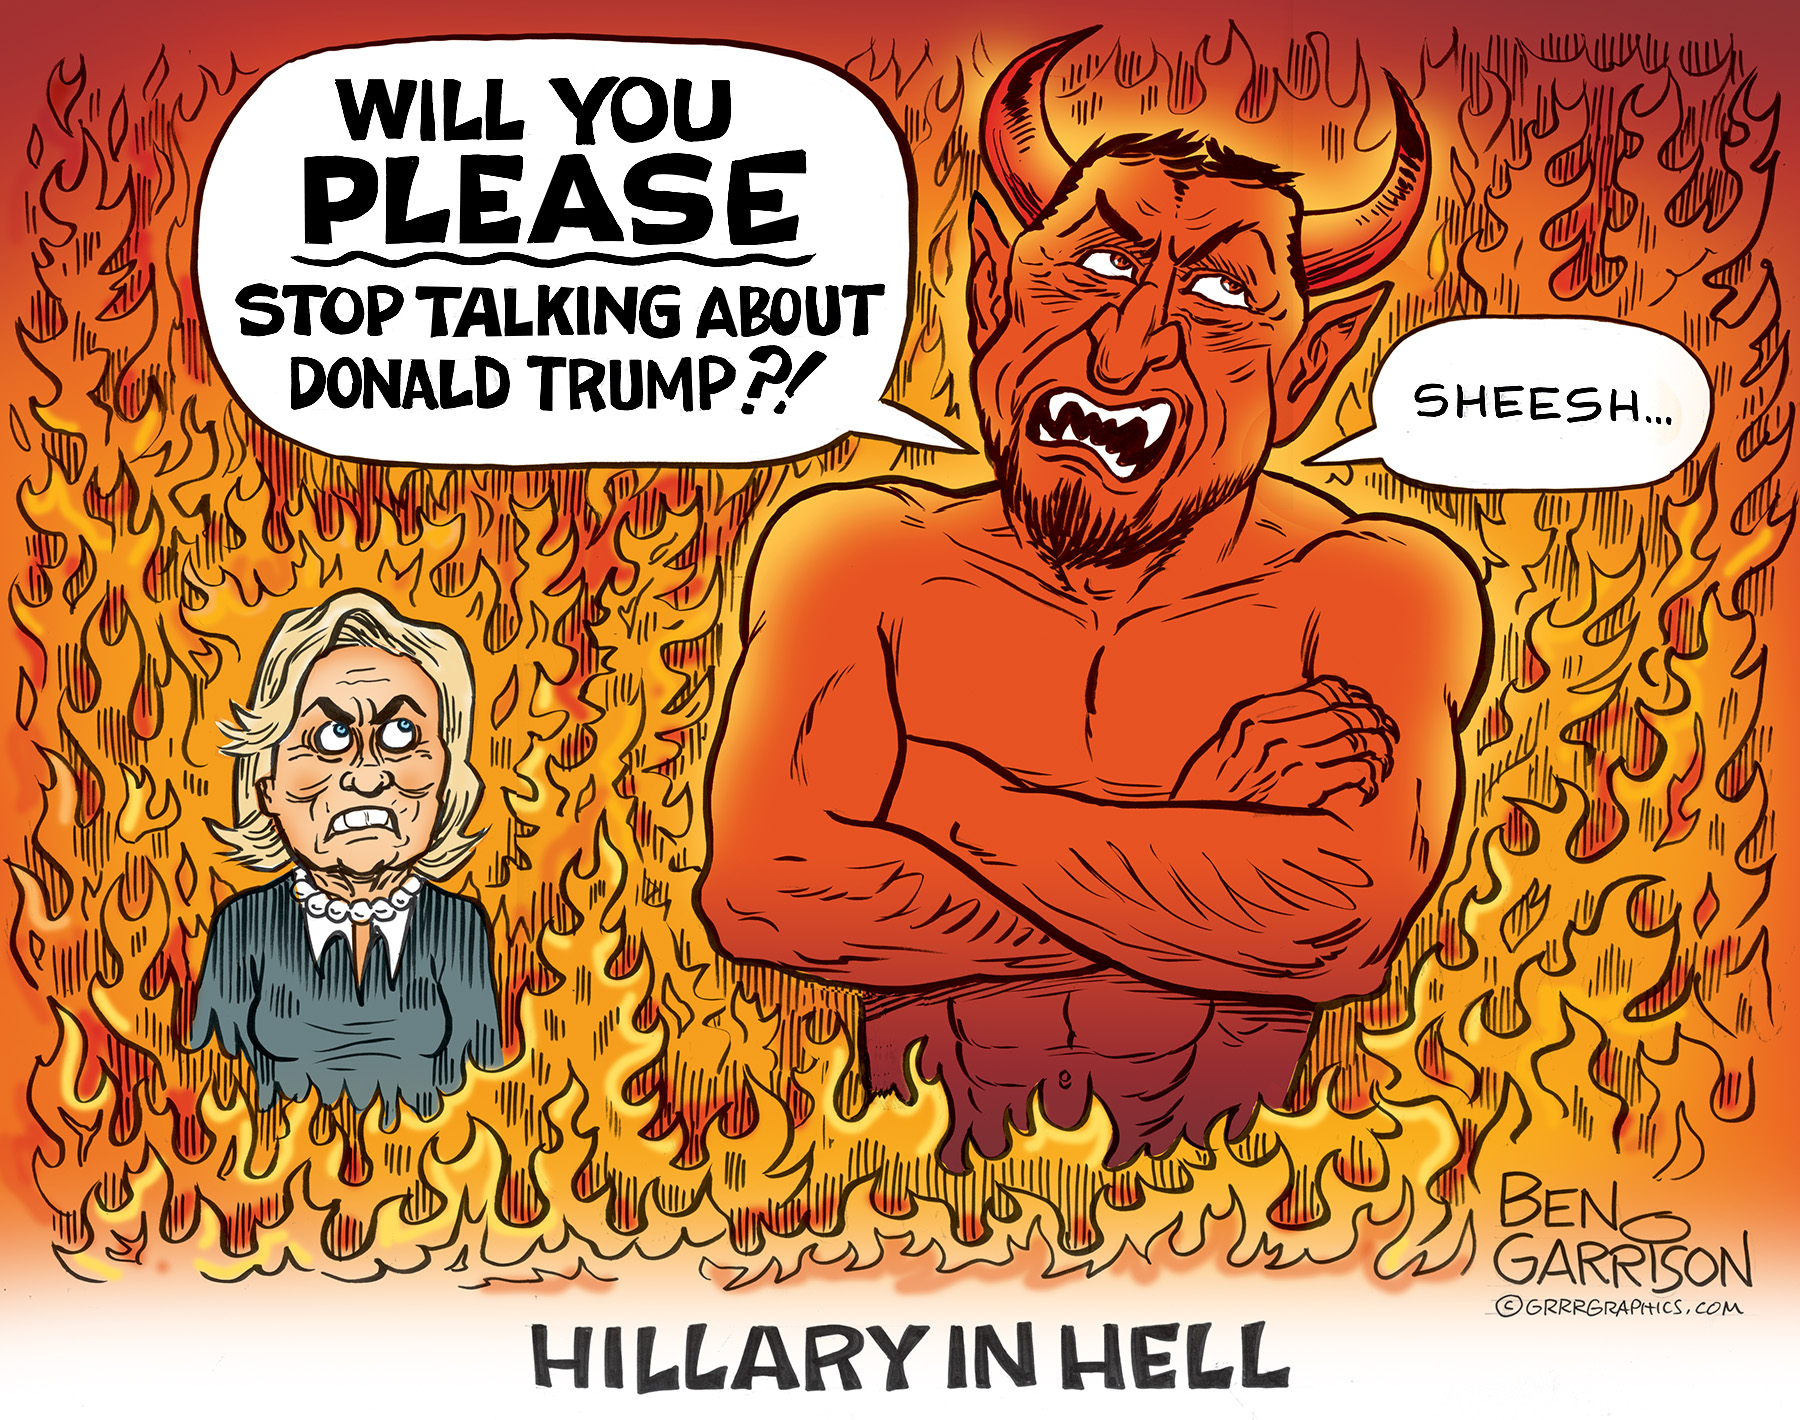 Hillary in Hell